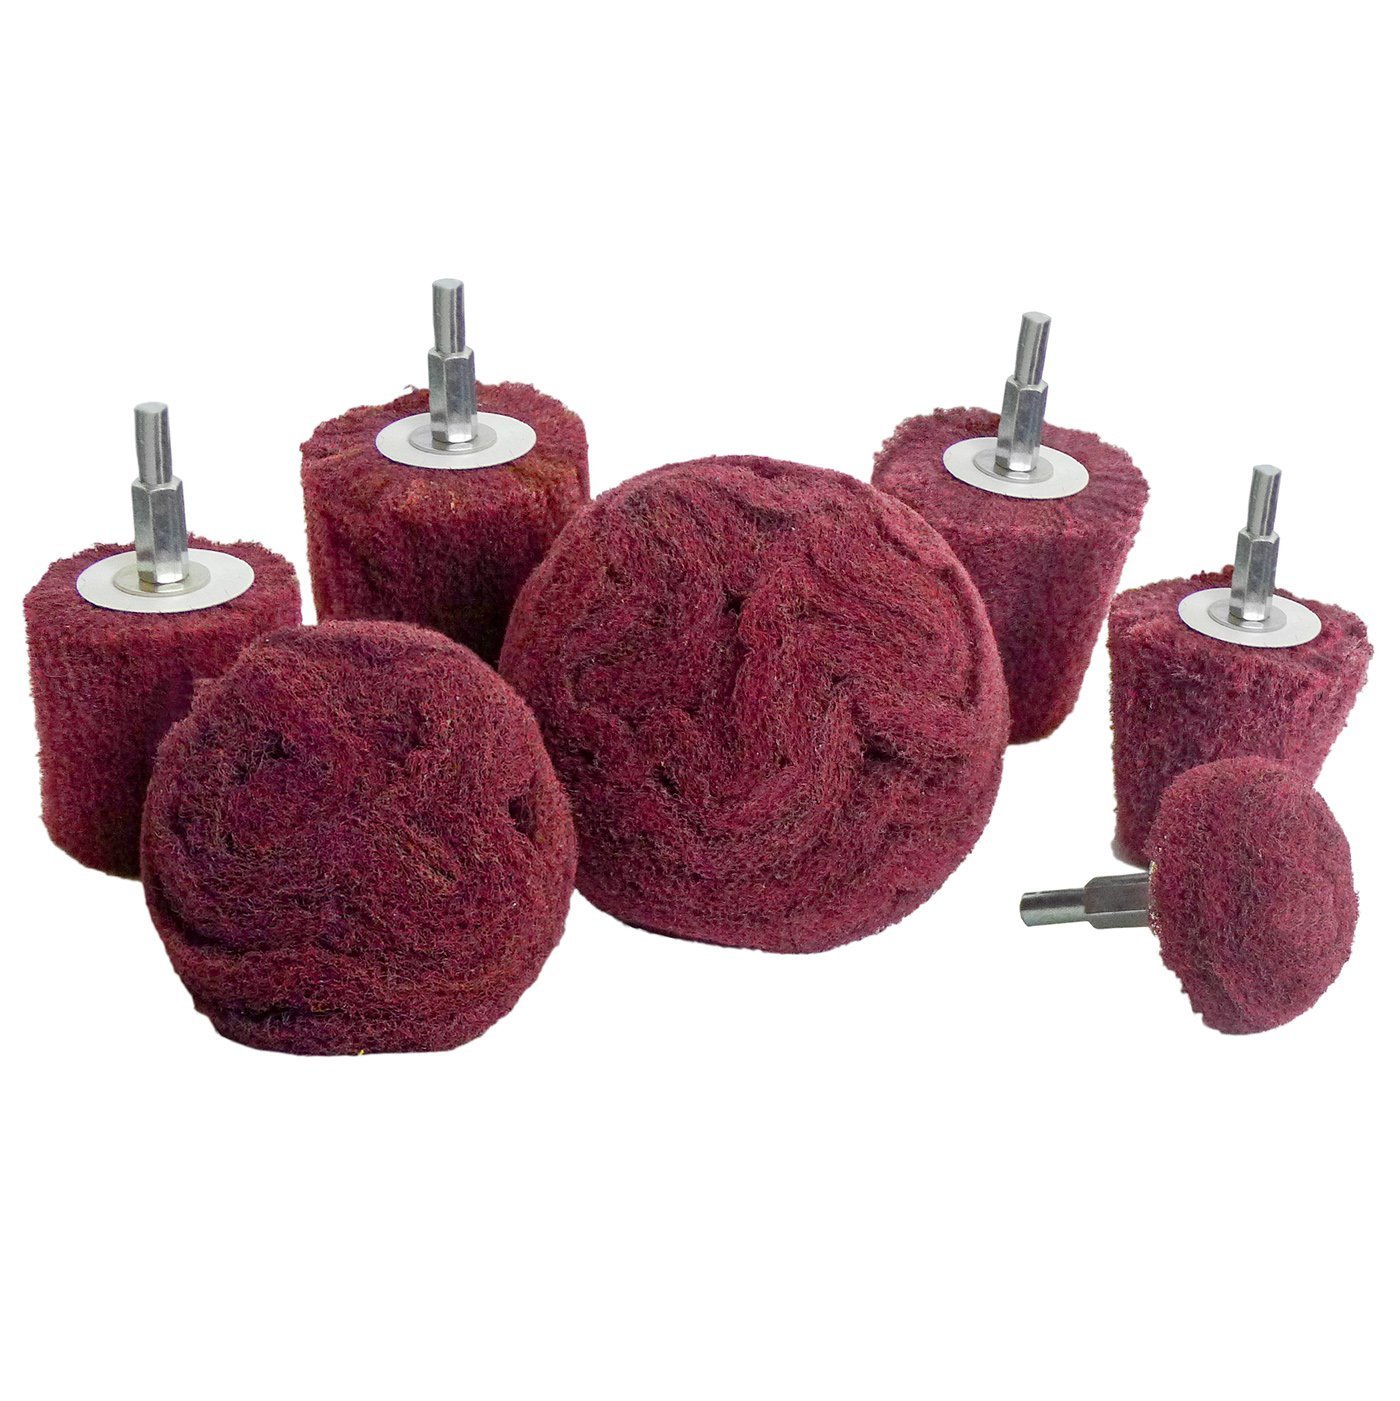 7pc Non-woven Abrasive Drill Buffers, Mounted on 1/4 inch Shank - Red - Fine